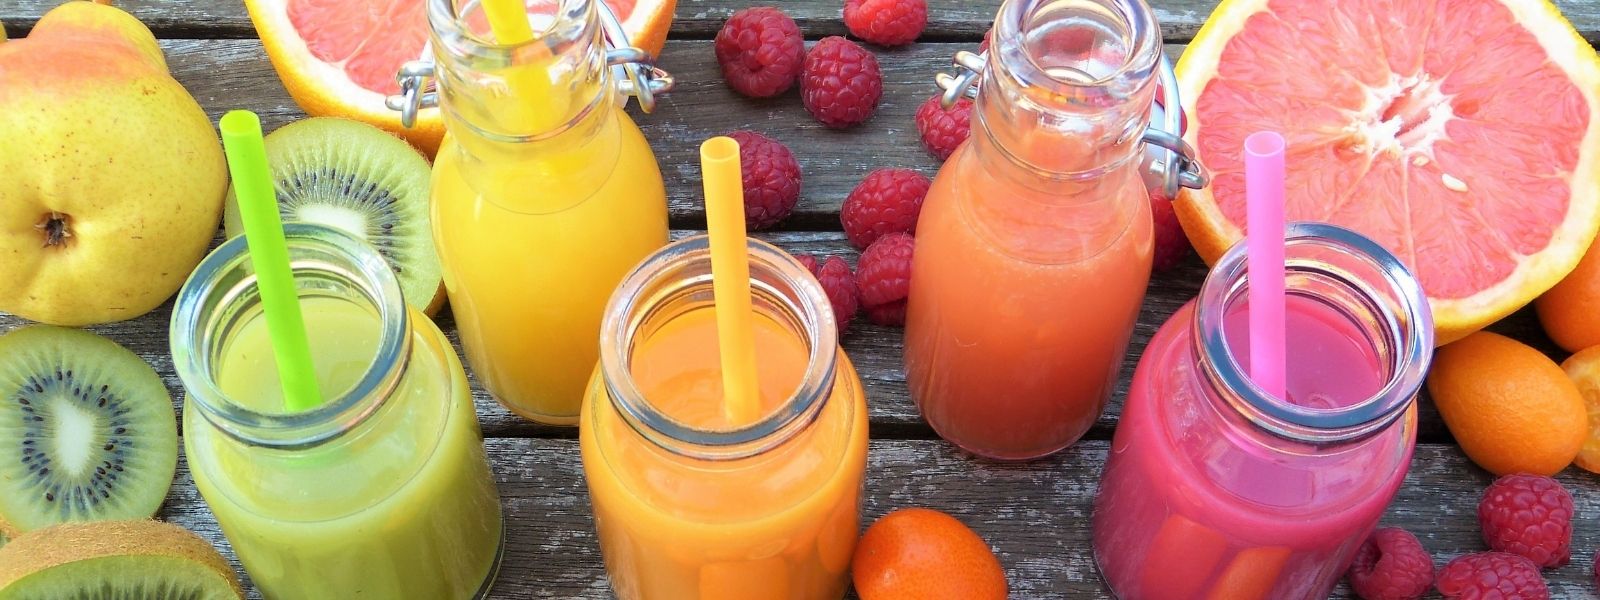 Fruit and smoothies